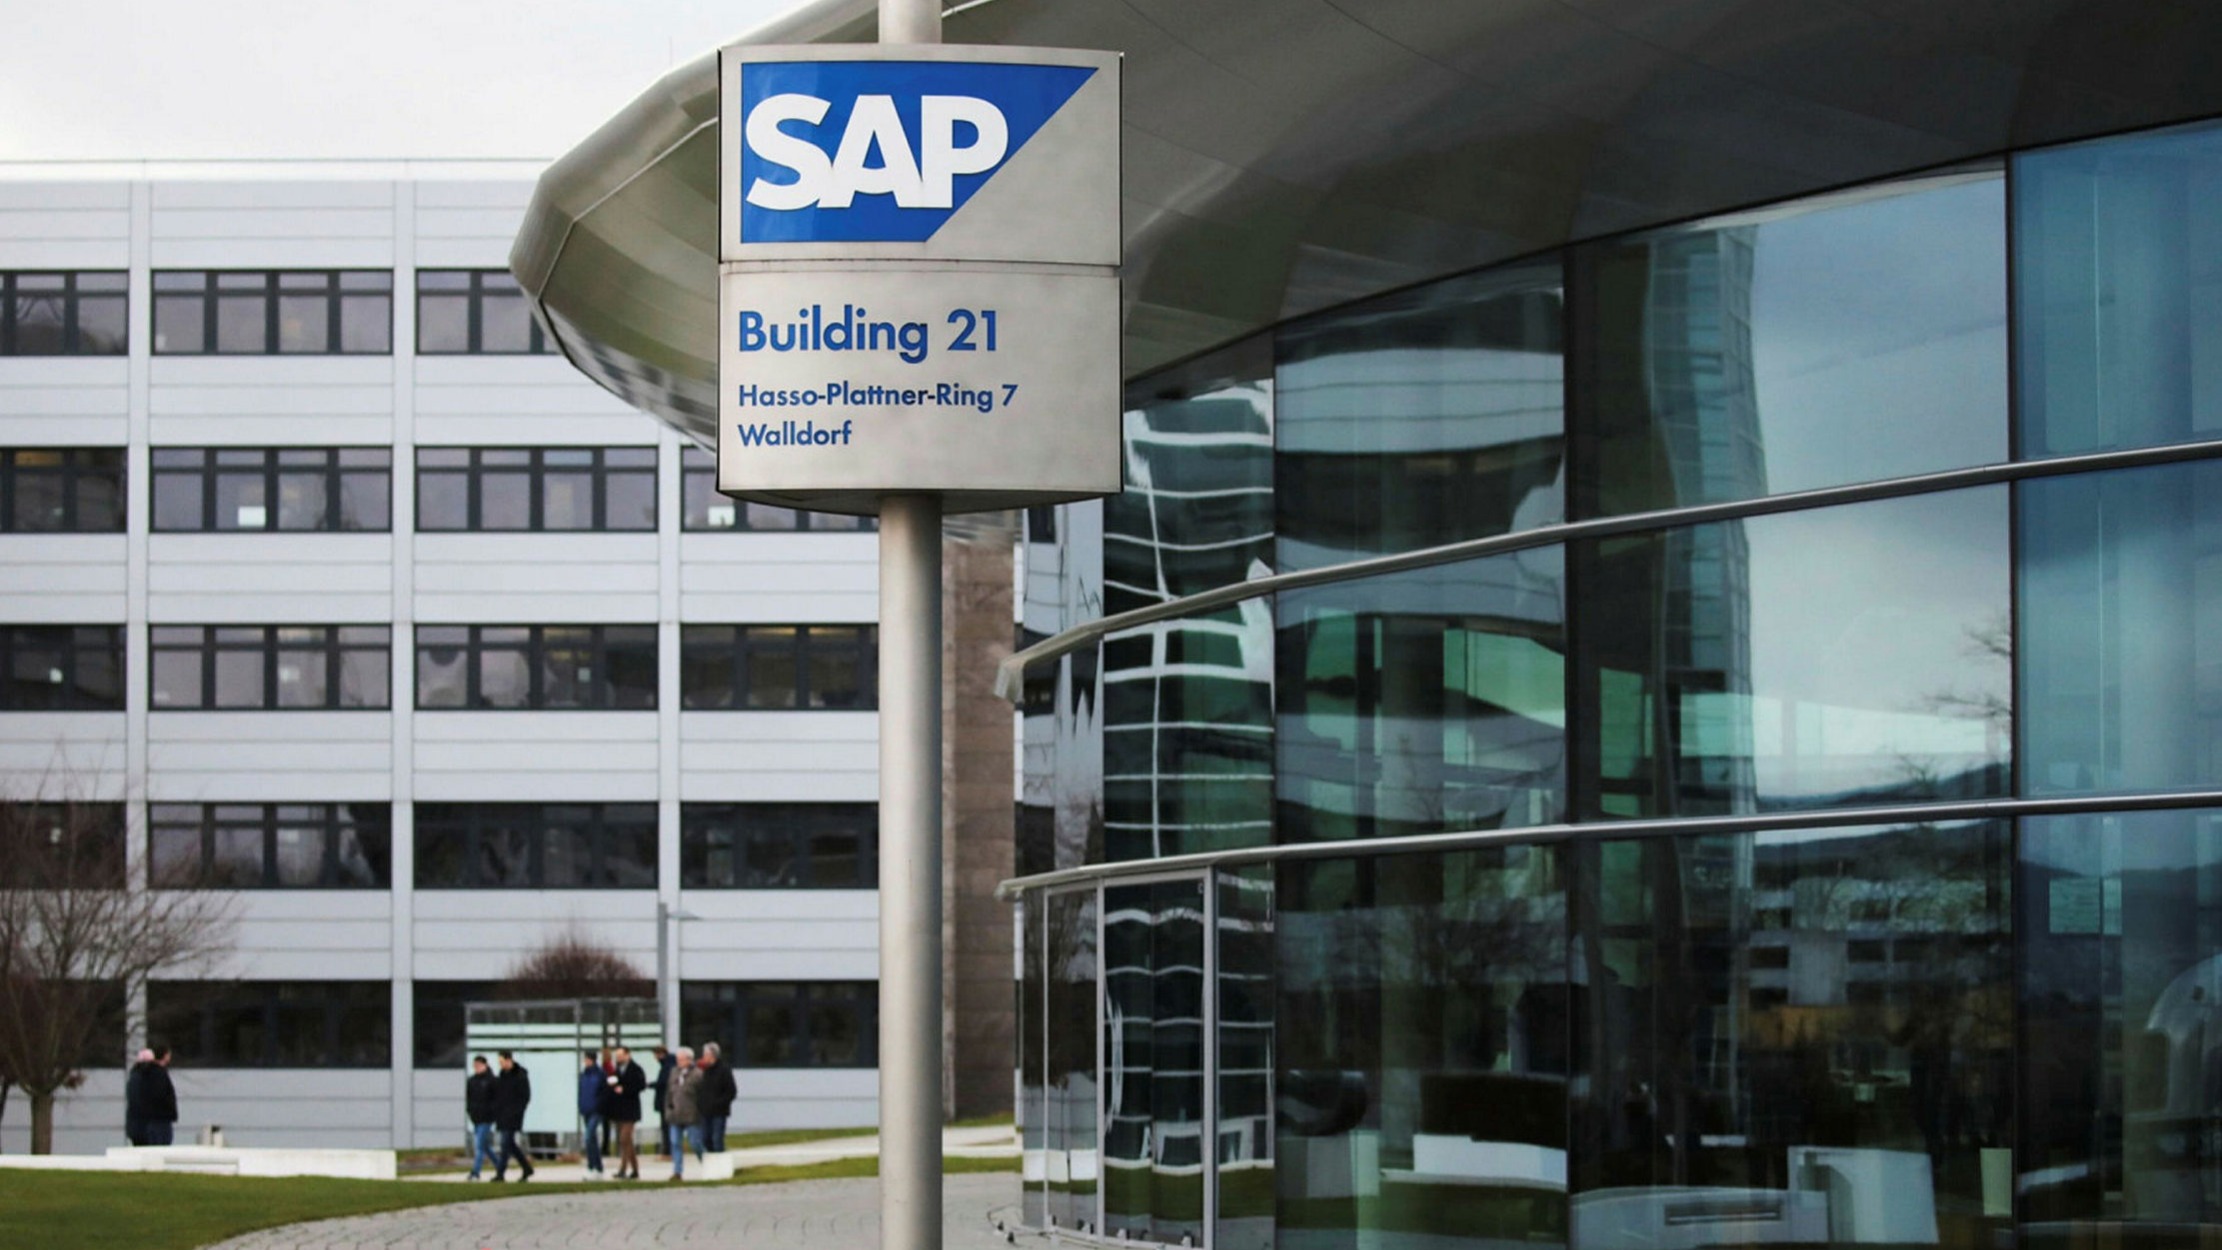 sap boss warns europe not to fall behind us and asia in tech | financial times